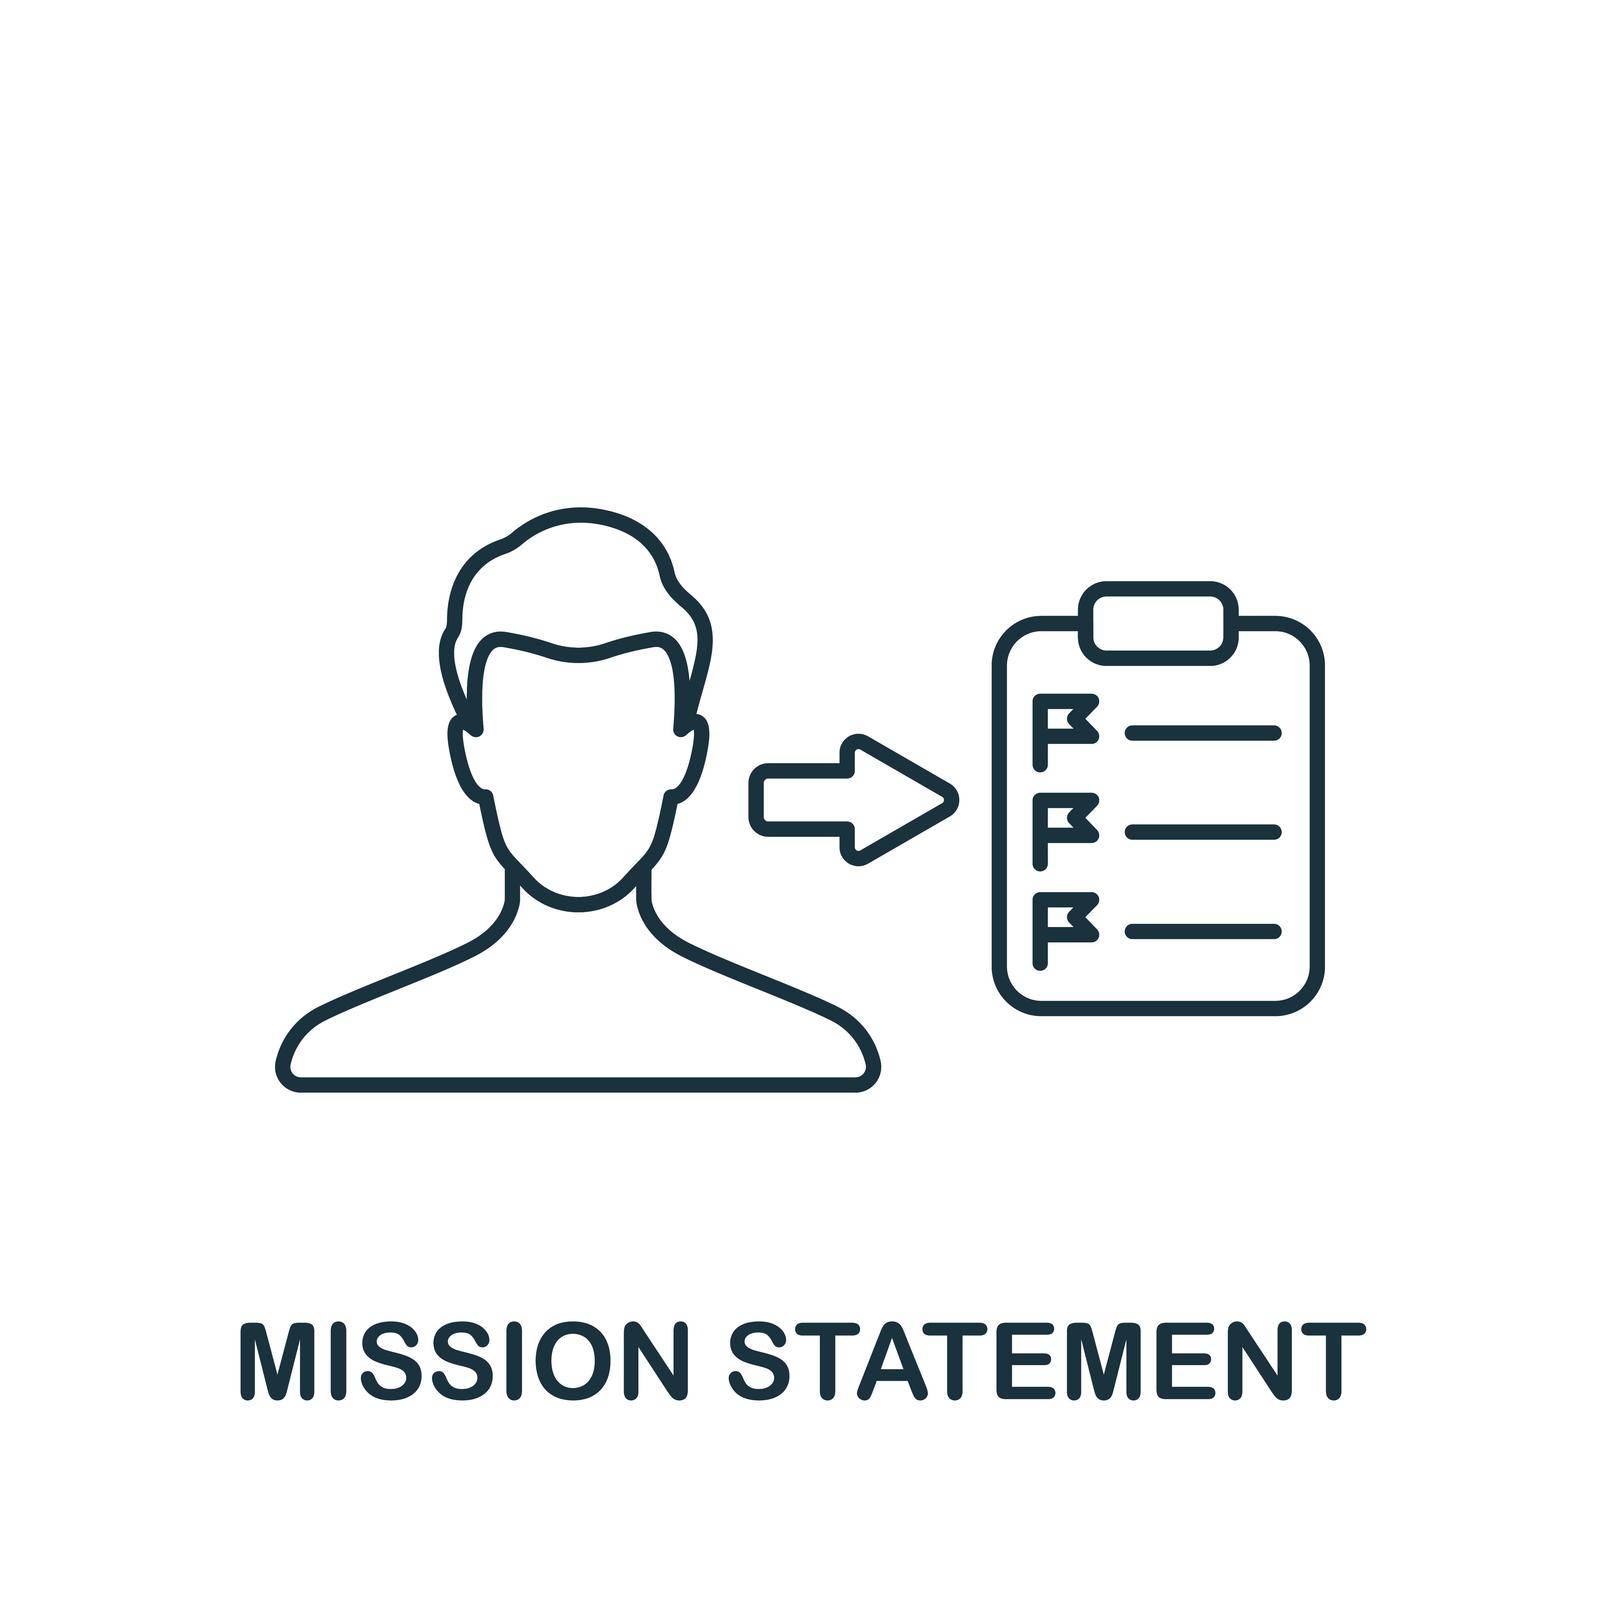 Mission Statement icon. Simple line element symbol for templates, web design and infographics.